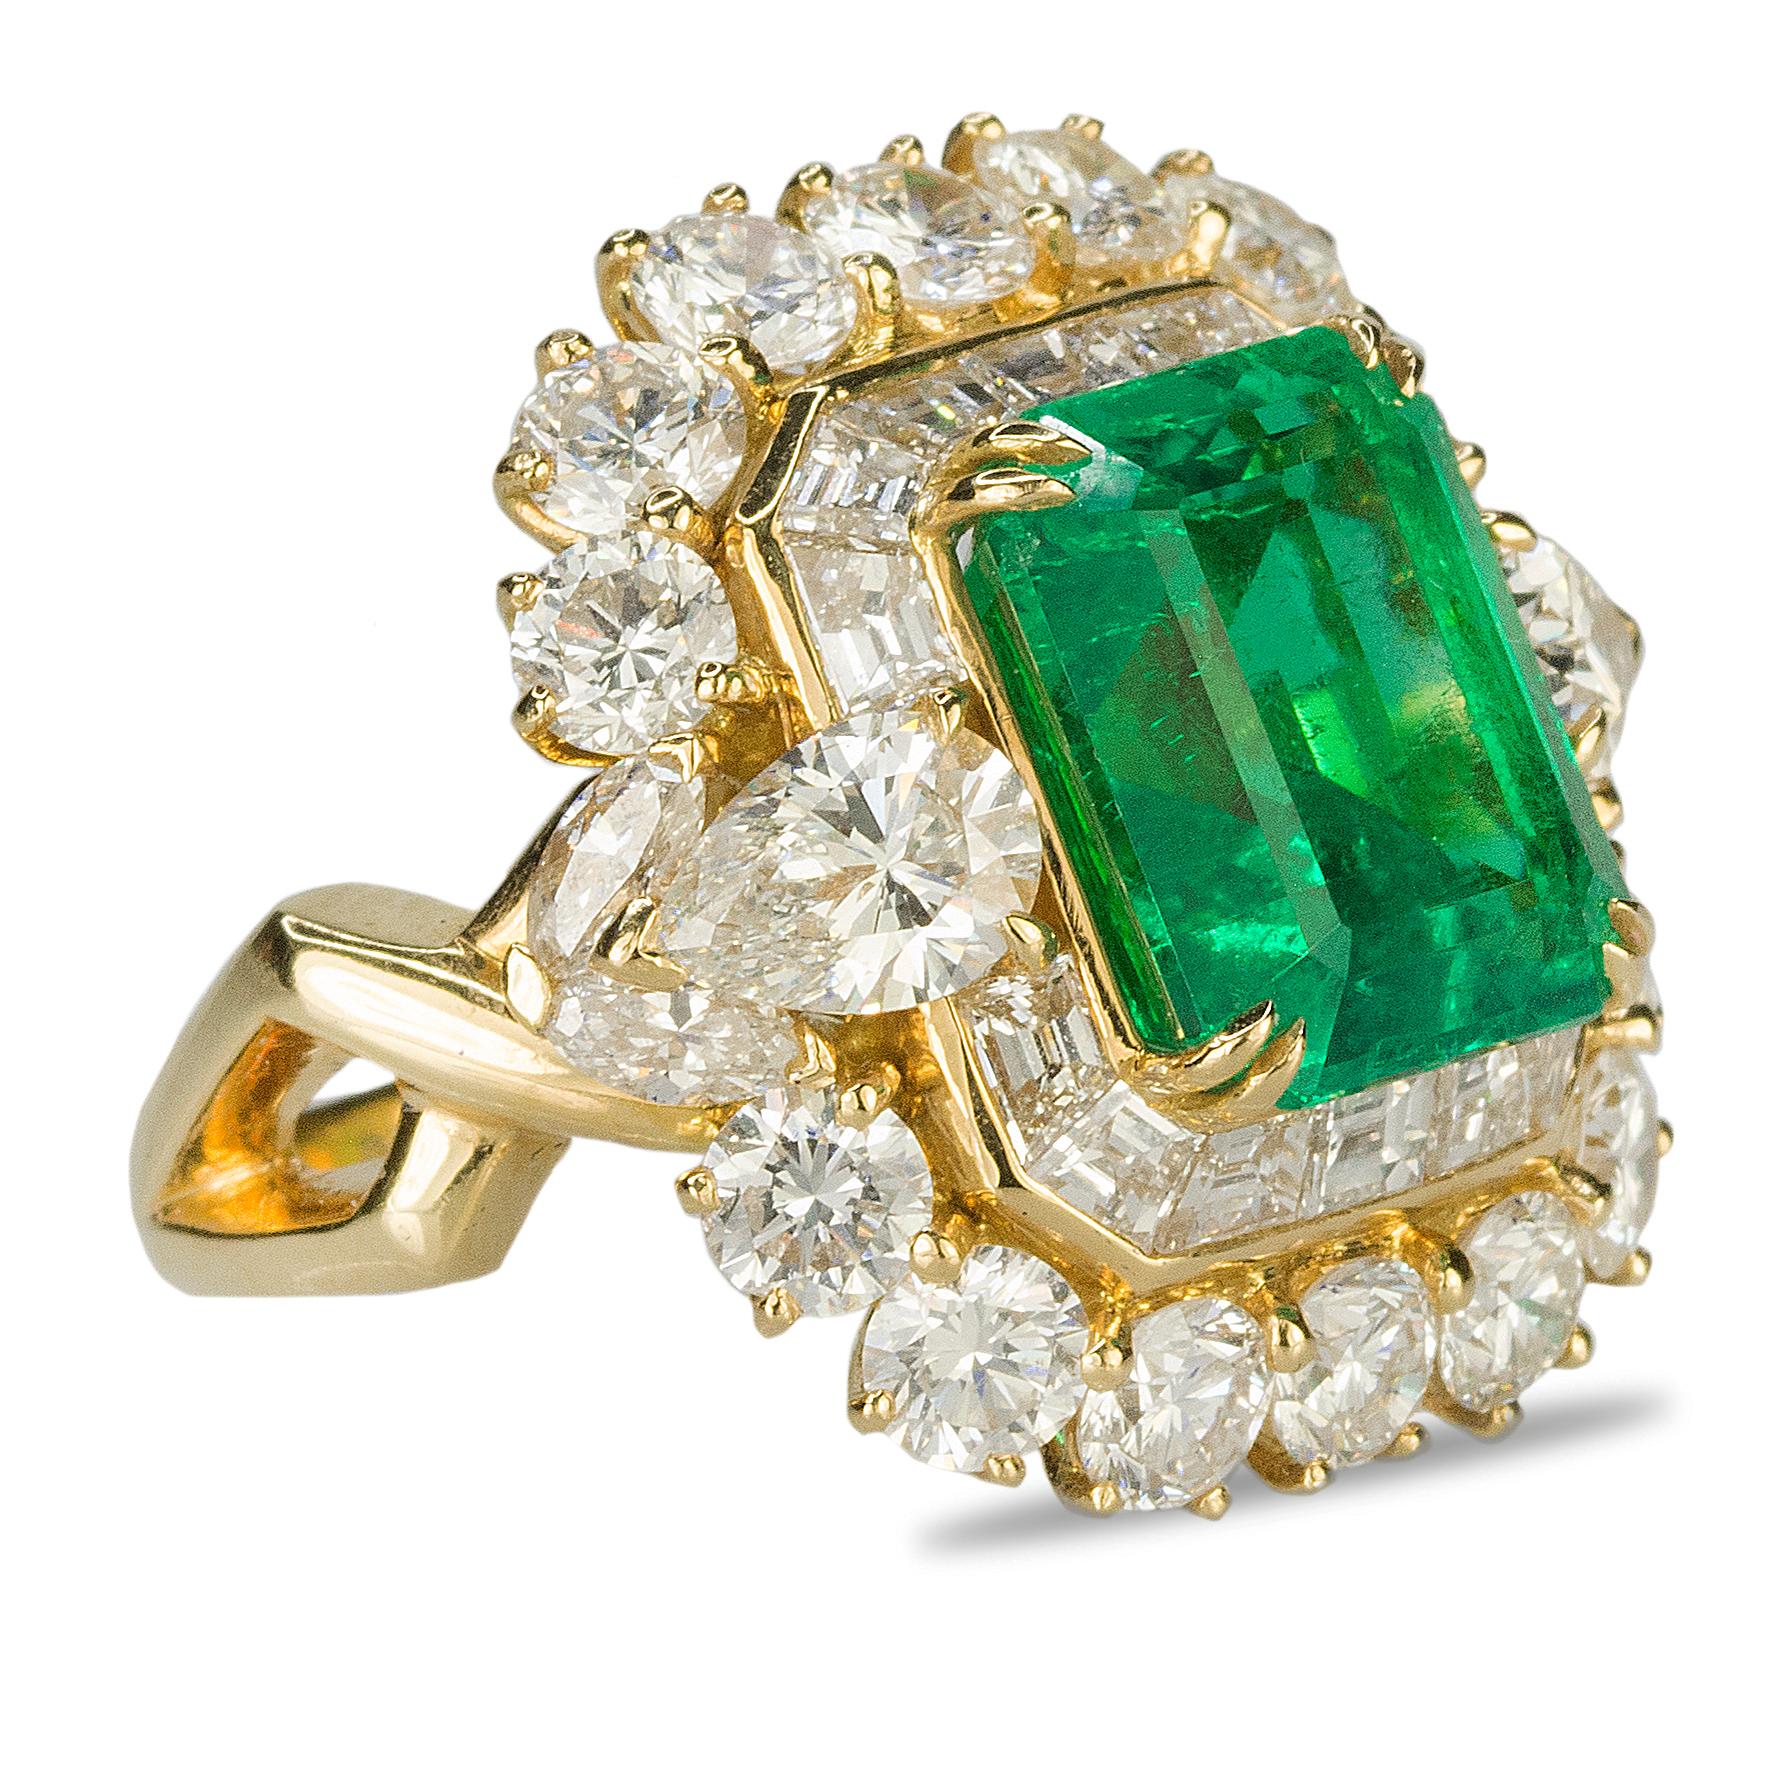 18k ring containing one AGL certified fine 6.25 carat Colombian Emerald and and 2 pear shape diamonds, 14 round brilliants and 14 baguette diamonds with a total weight of approximately 5.60